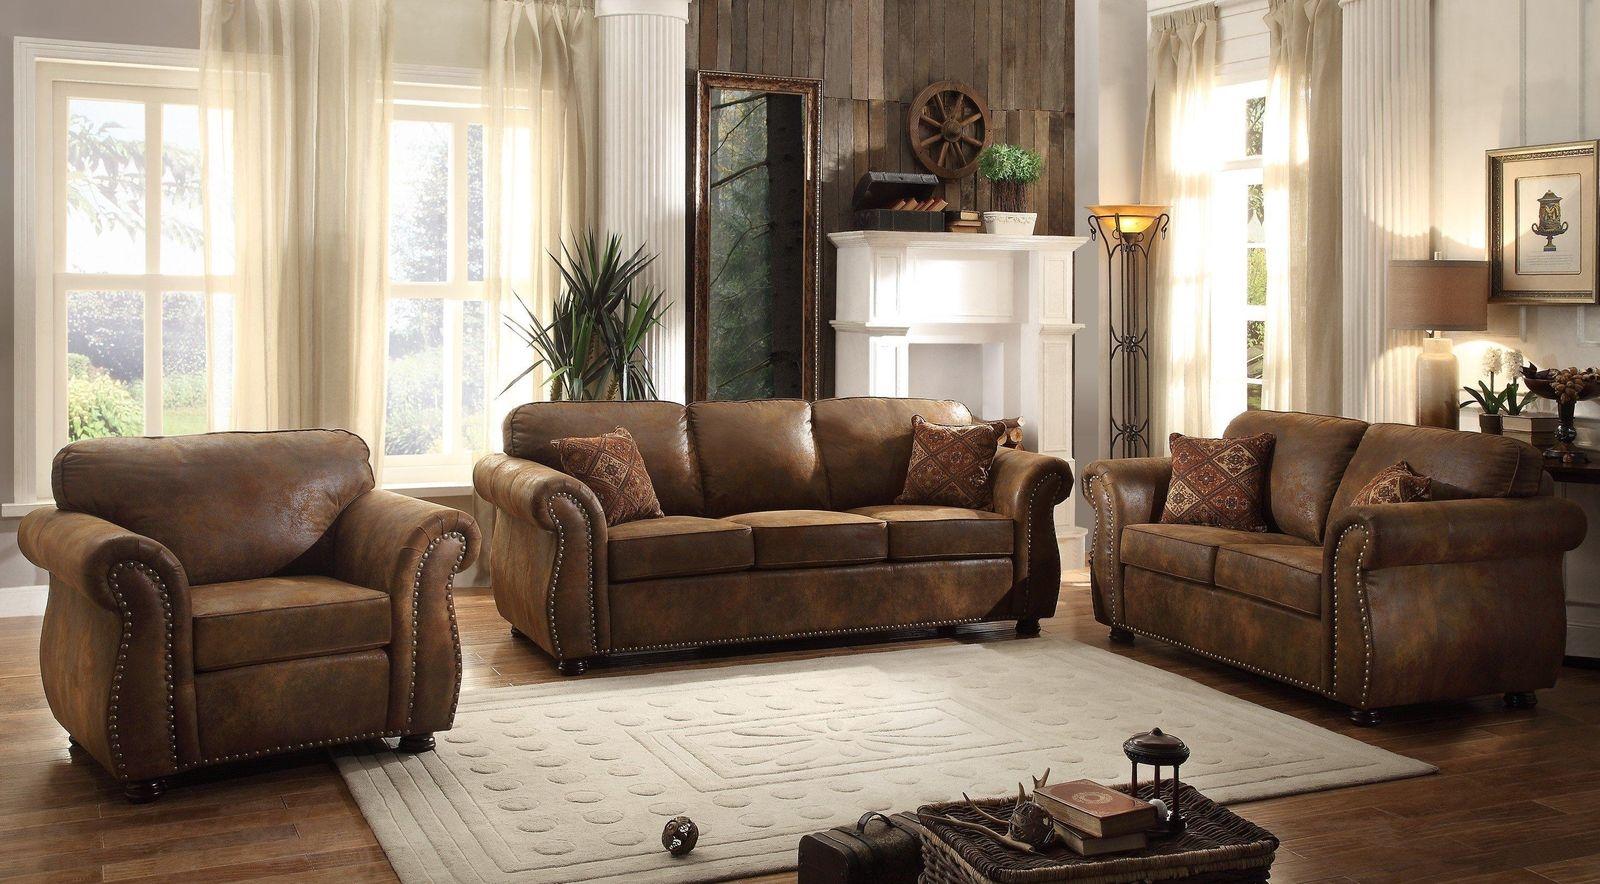 Classic, Traditional Sofa Loveseat and Chair Set Corvallis 8405BJ-SET in Brown Microfiber